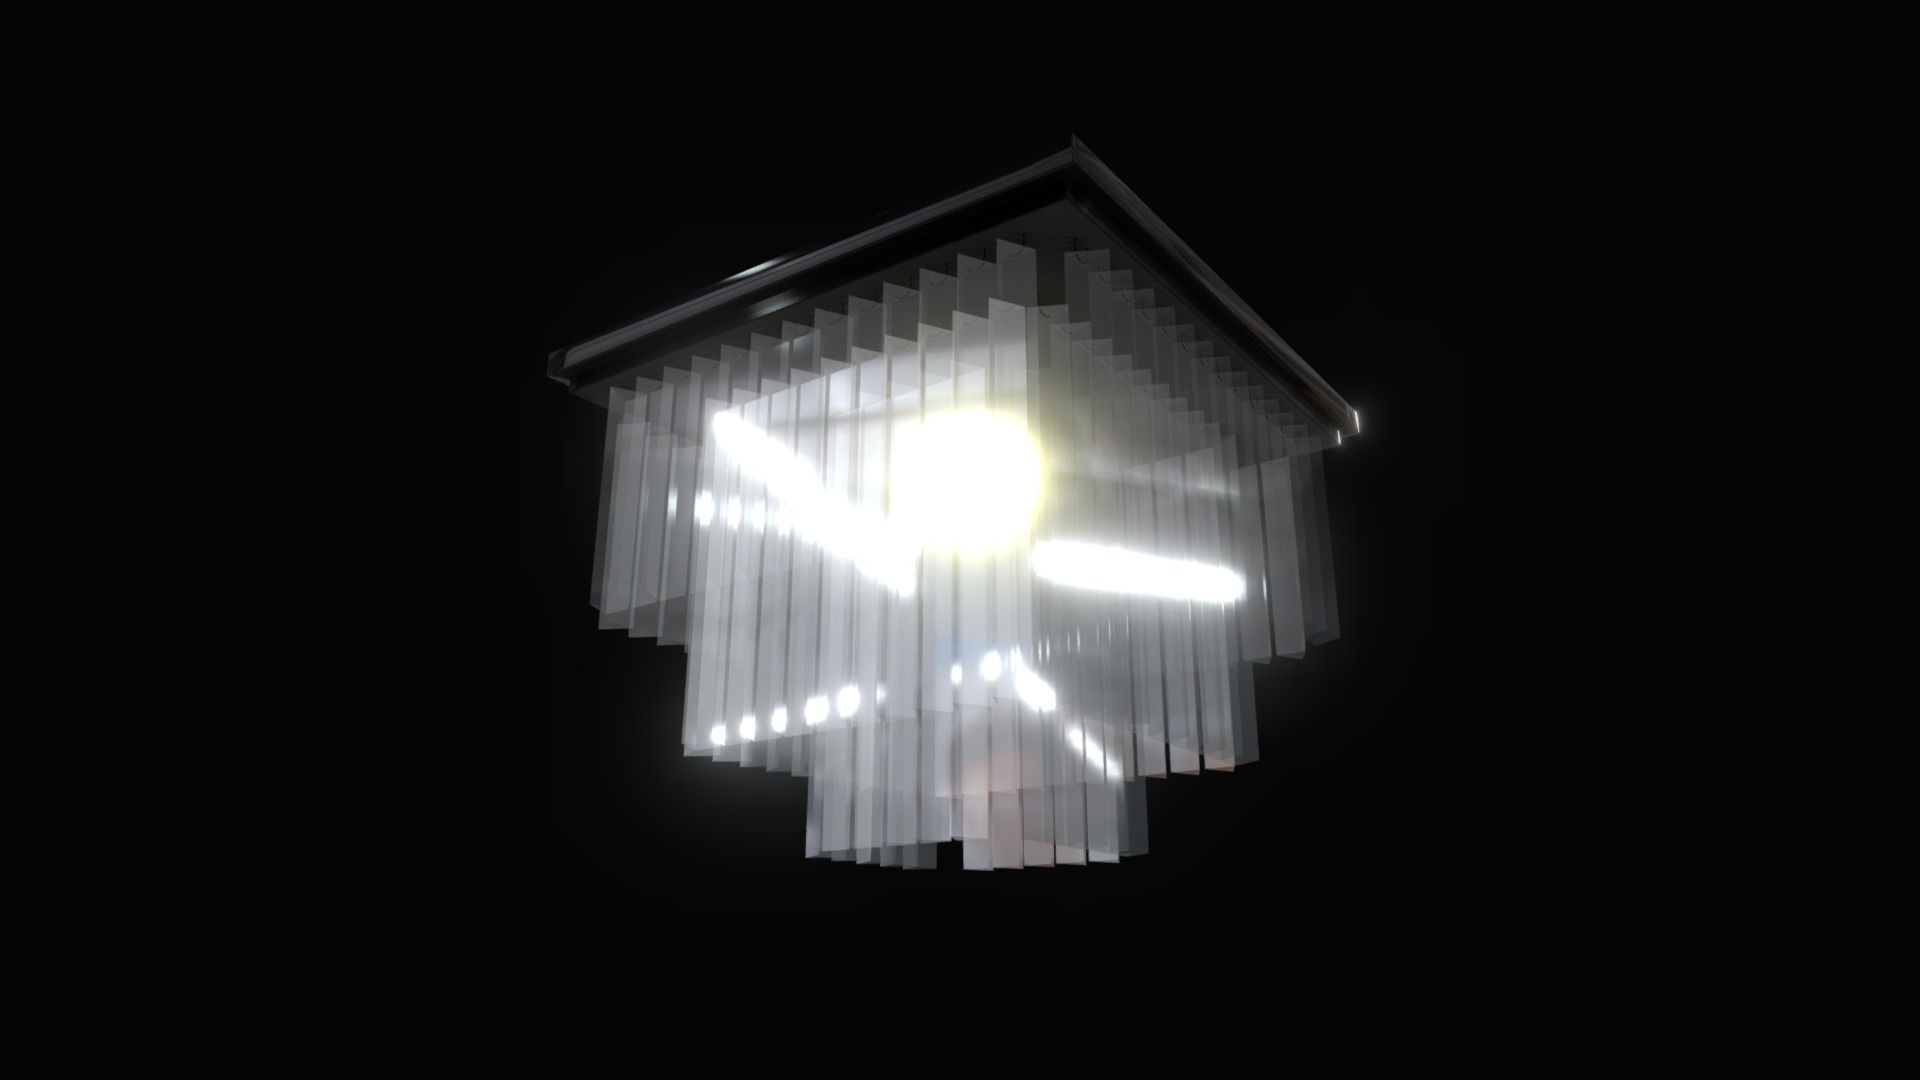 3D model HGPOGS-CL64D - This is a 3D model of the HGPOGS-CL64D. The 3D model is about a light in a room.